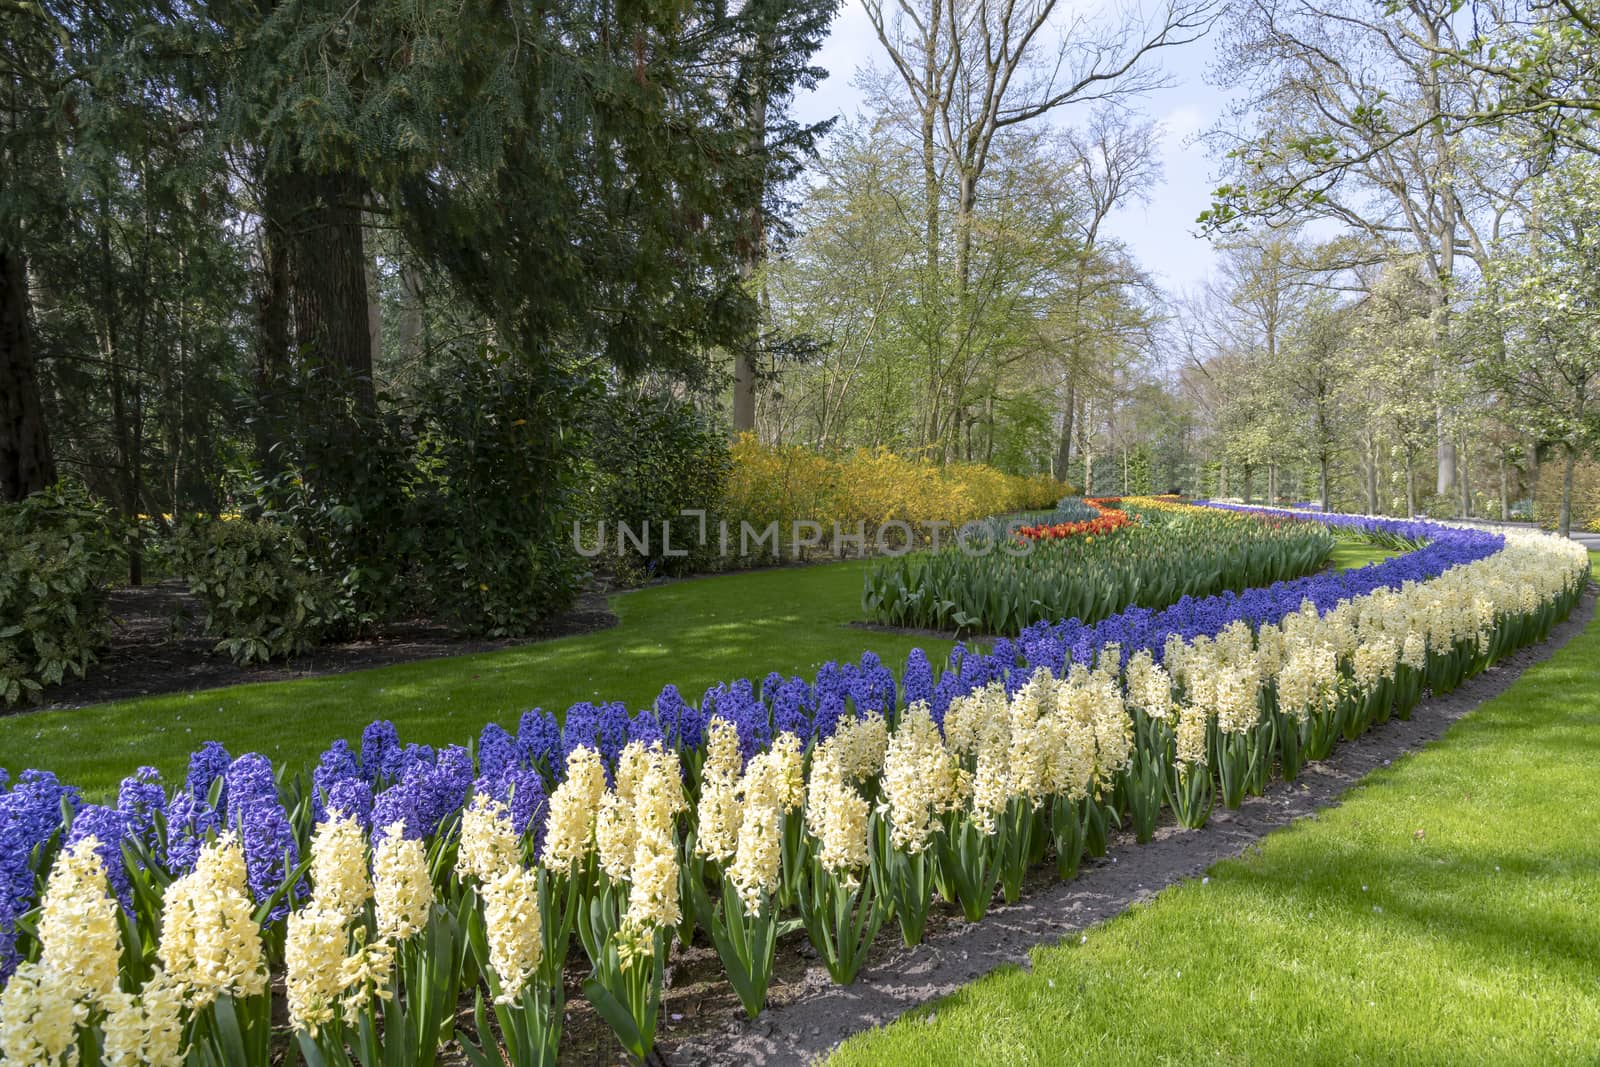 Endless band of blue and white color hyacinths in a well maintained garden with tulips